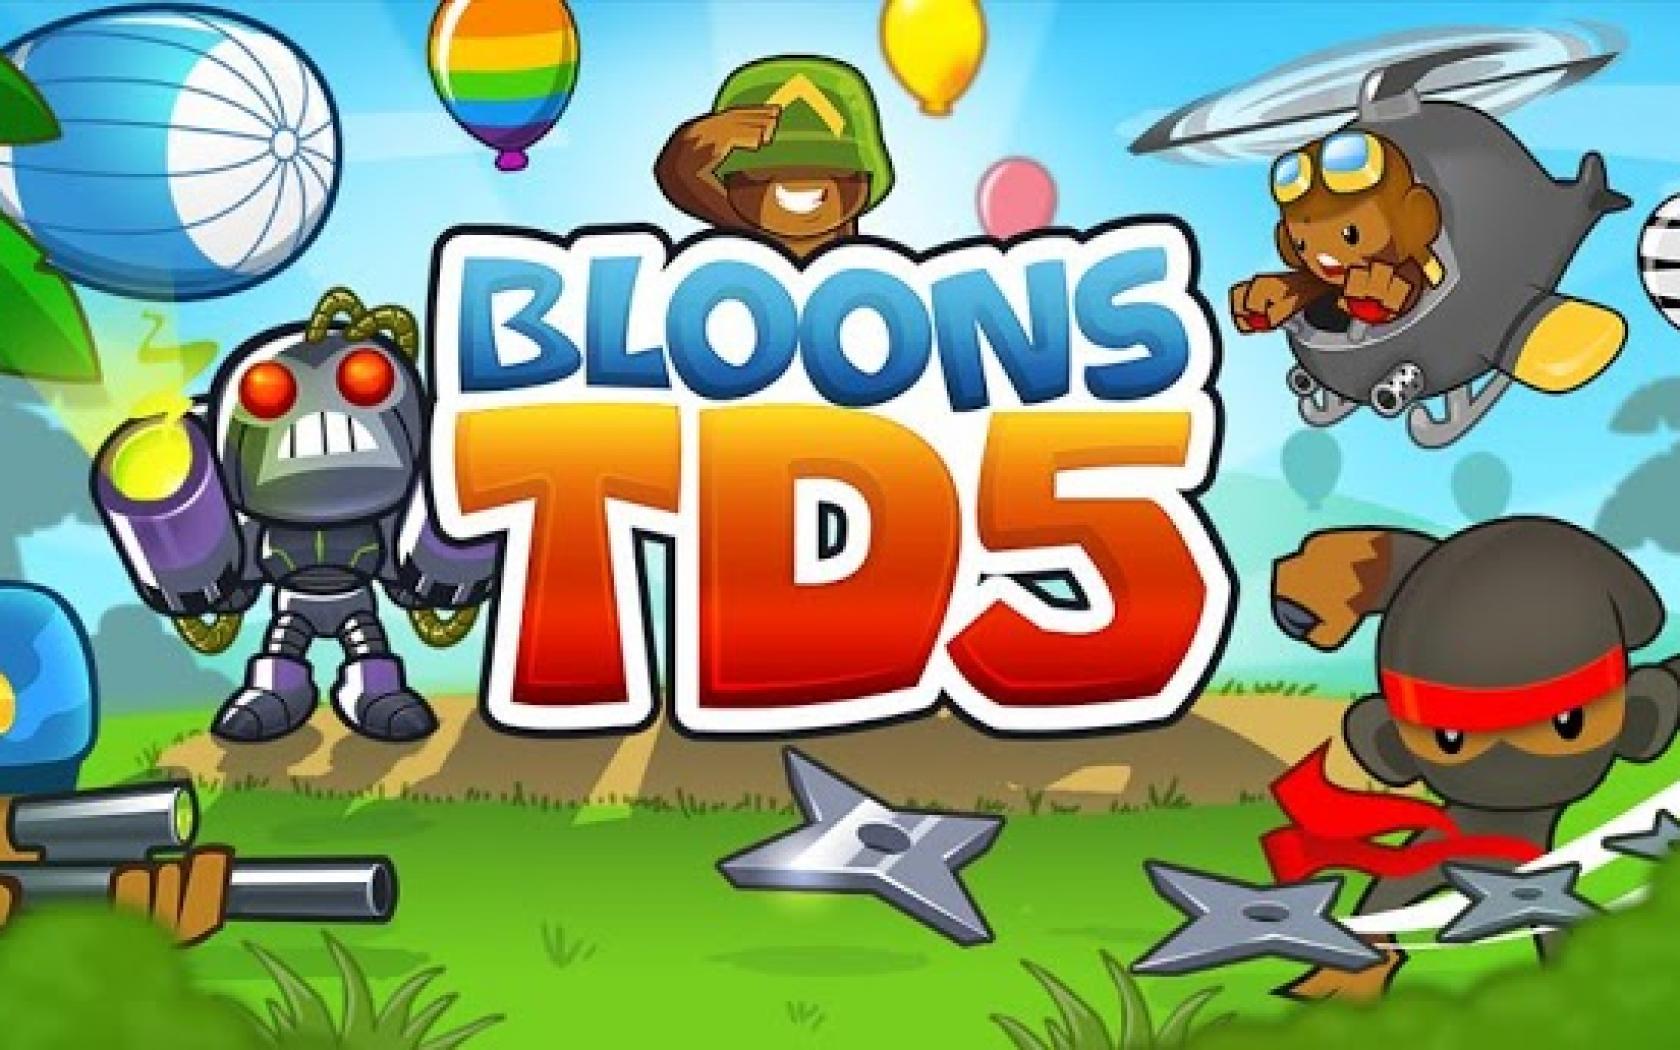 bloons tower defence games